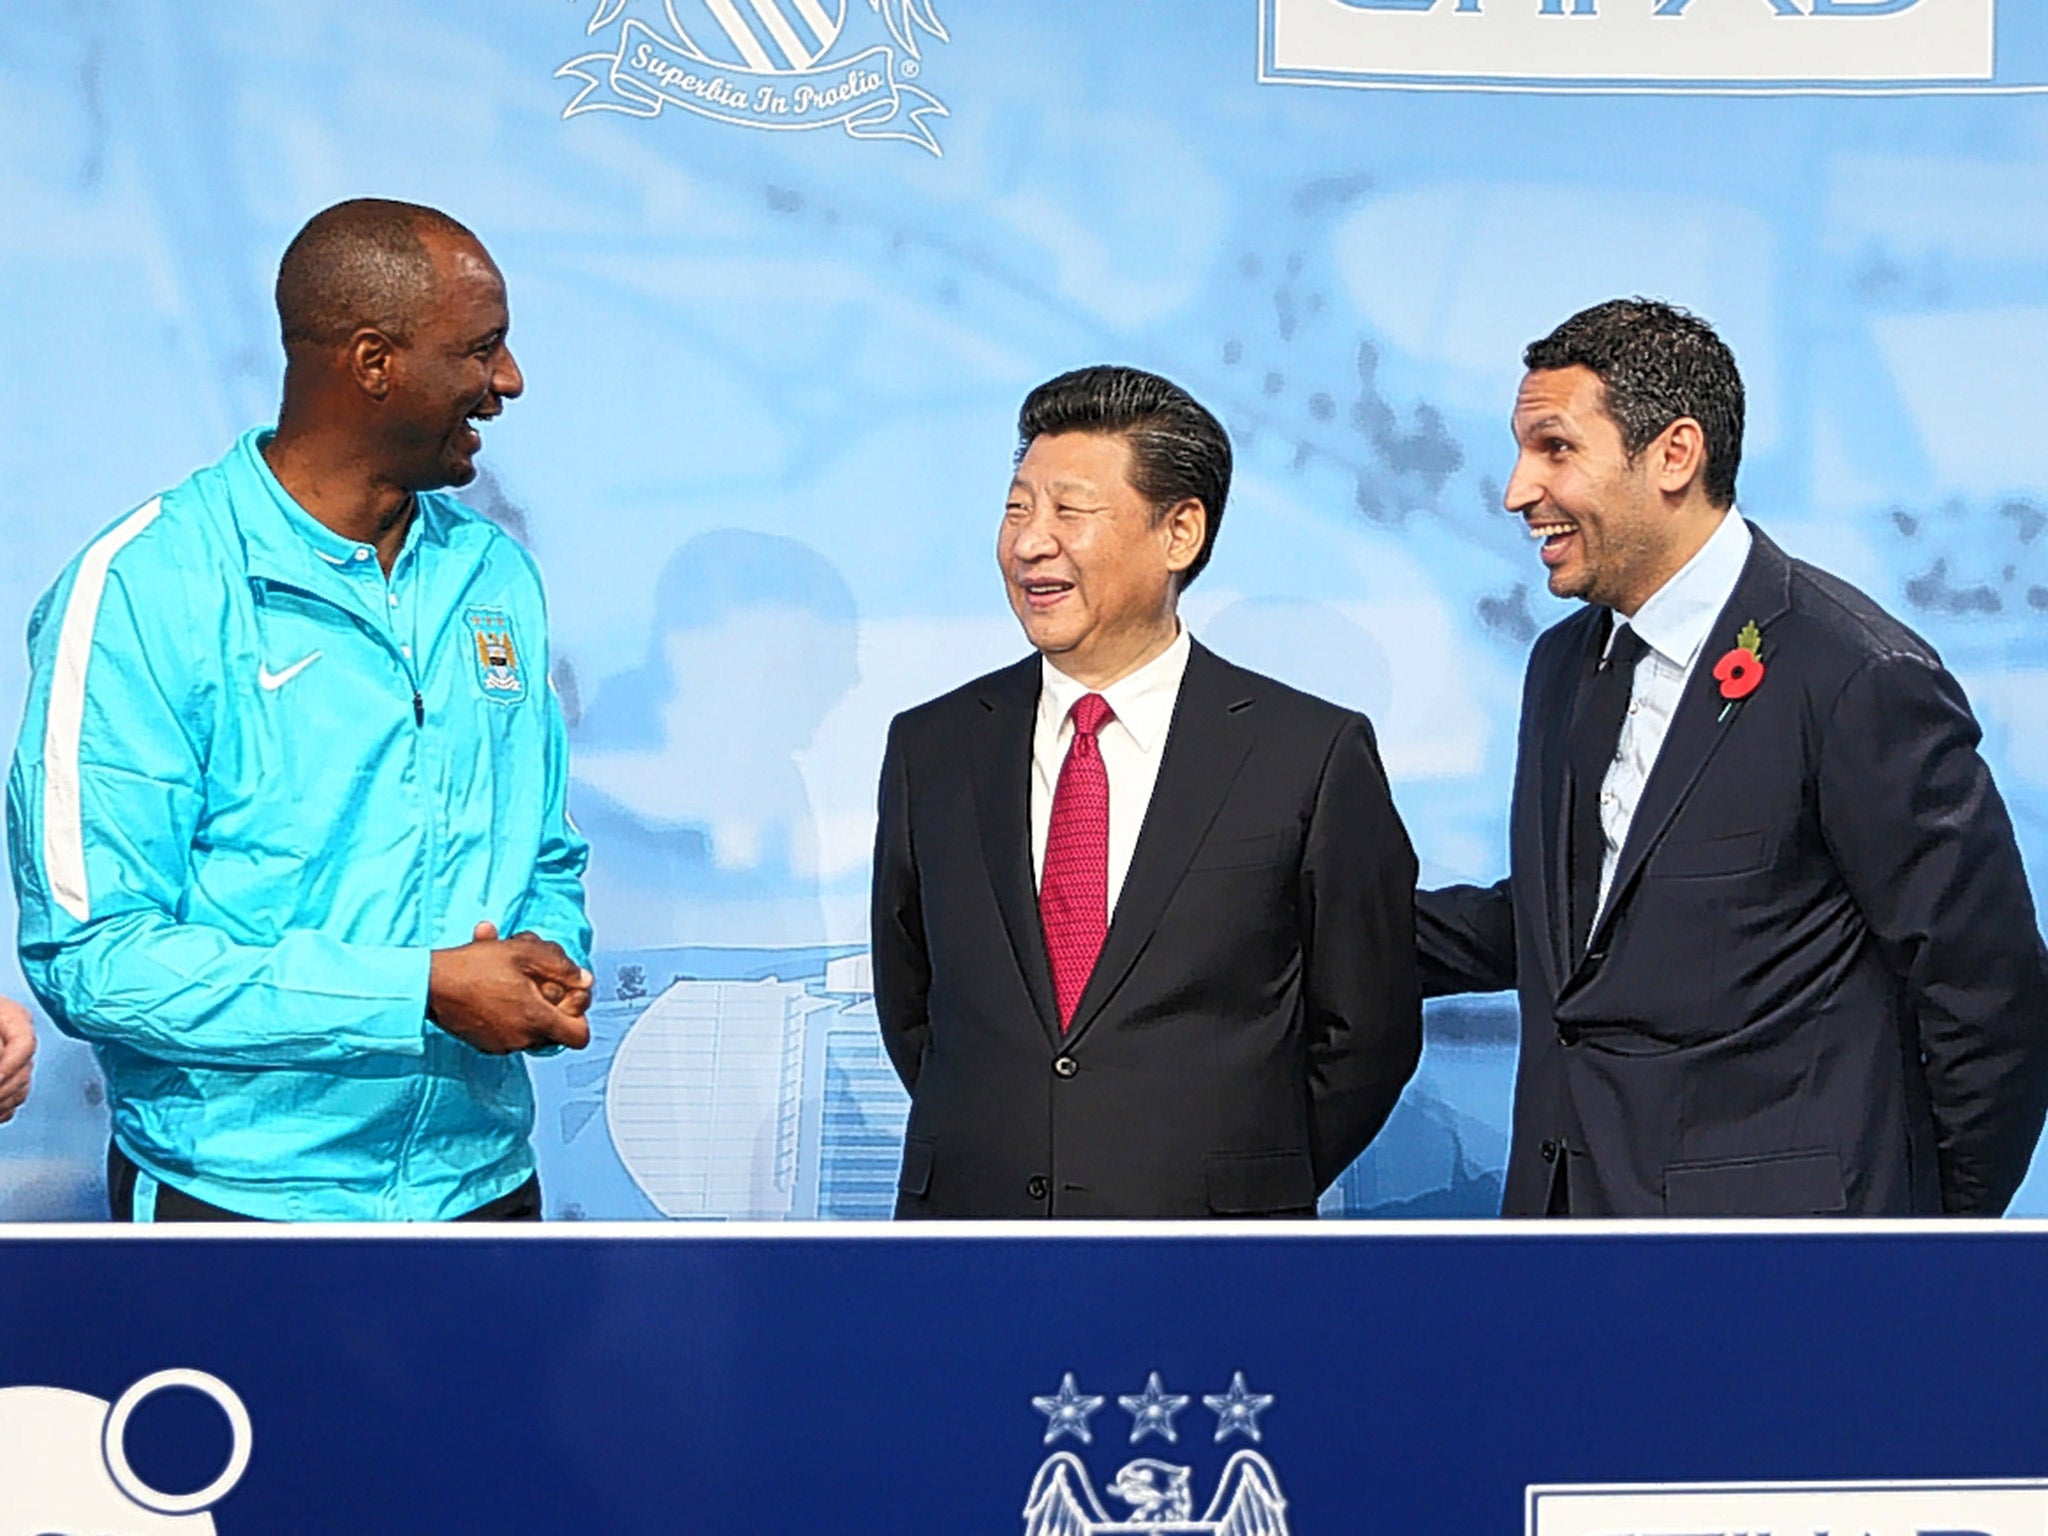 Manchester City’s Elite Development Squad head coach Patrick Vieira, Chinese President Xi Jingping and City Chairman Khaldoon Al Mubarack during a visit to the City Football Academy in Manchester